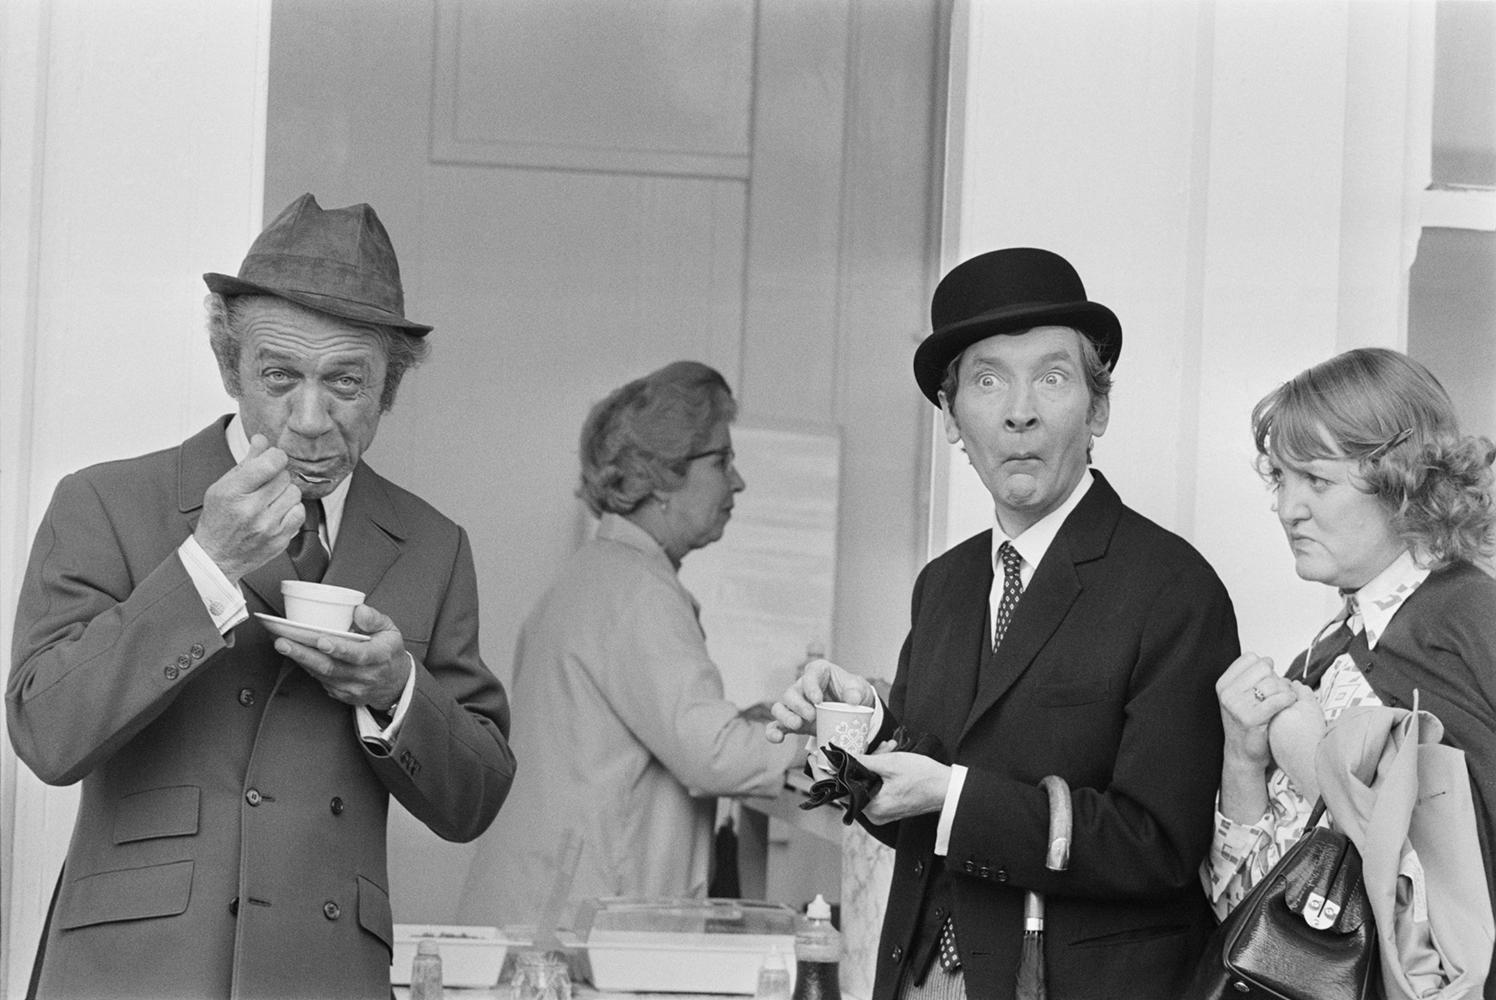 Larry Ellis Black and White Photograph - ' Carry On Tea Break ' Giant Oversize Limited Edition Silver Gelatin Print 